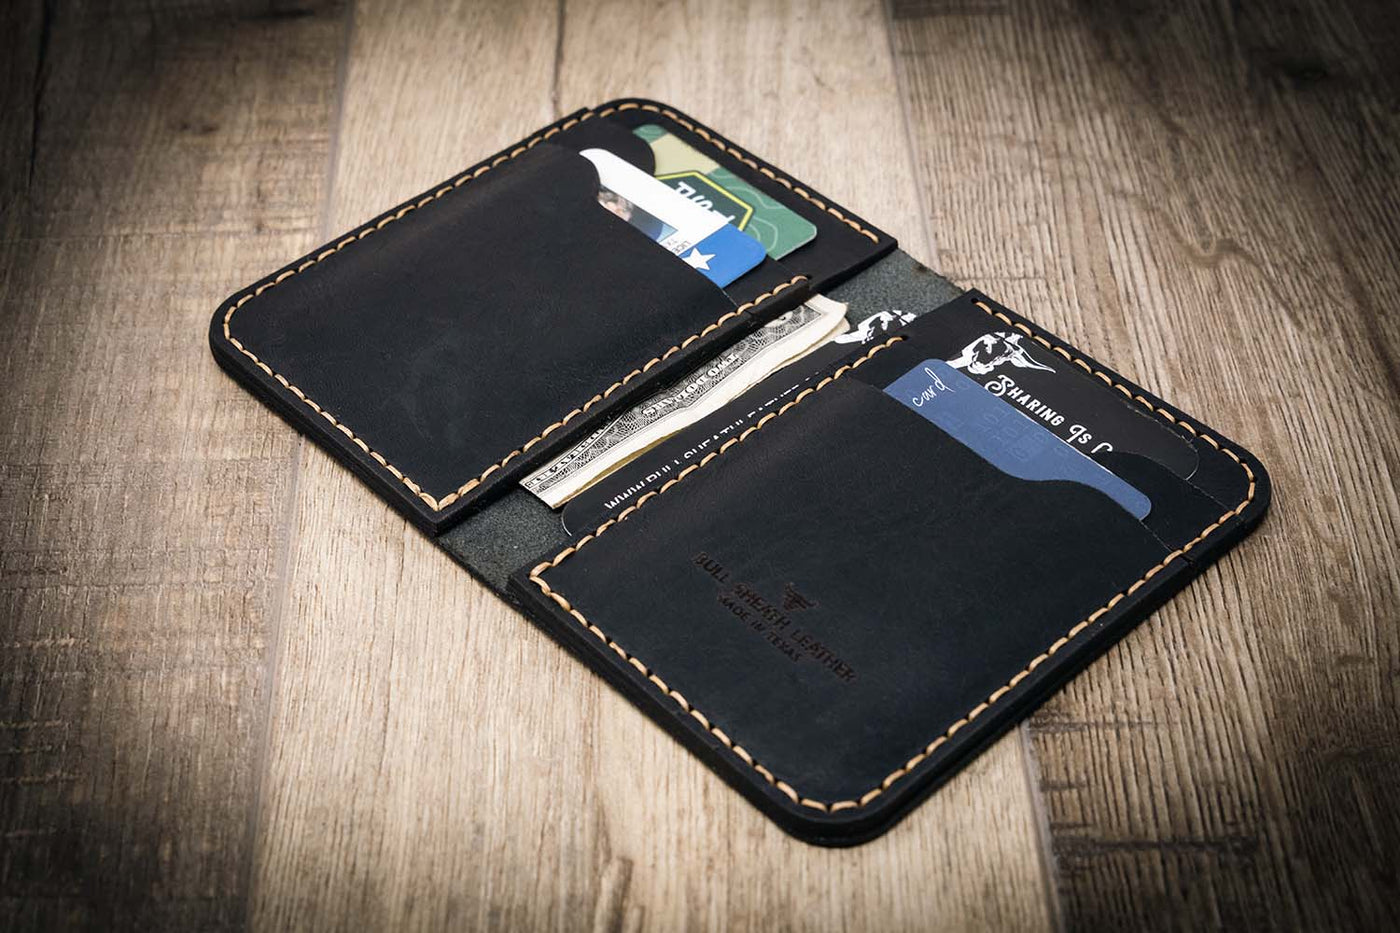 Leather Vertical Bifold Card wallet